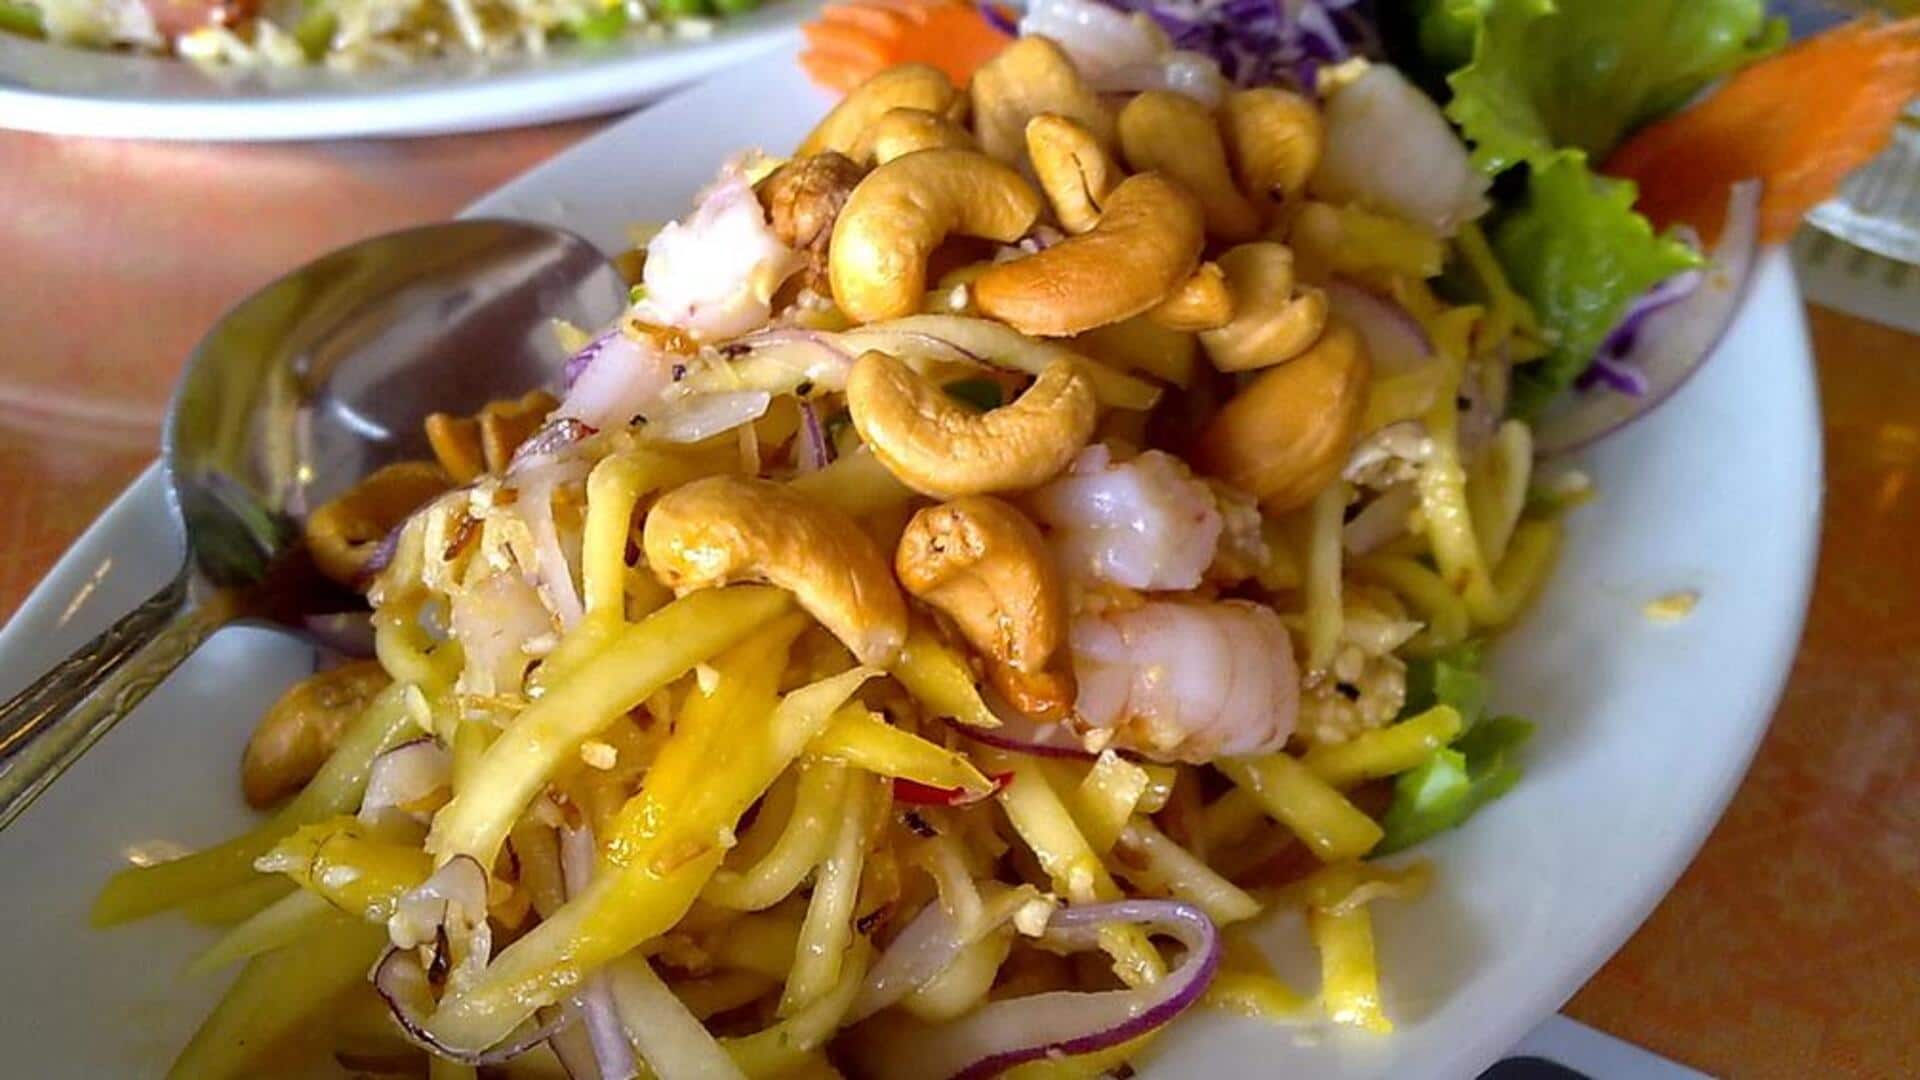 Recipe: Your guests will love this Thai mango salad